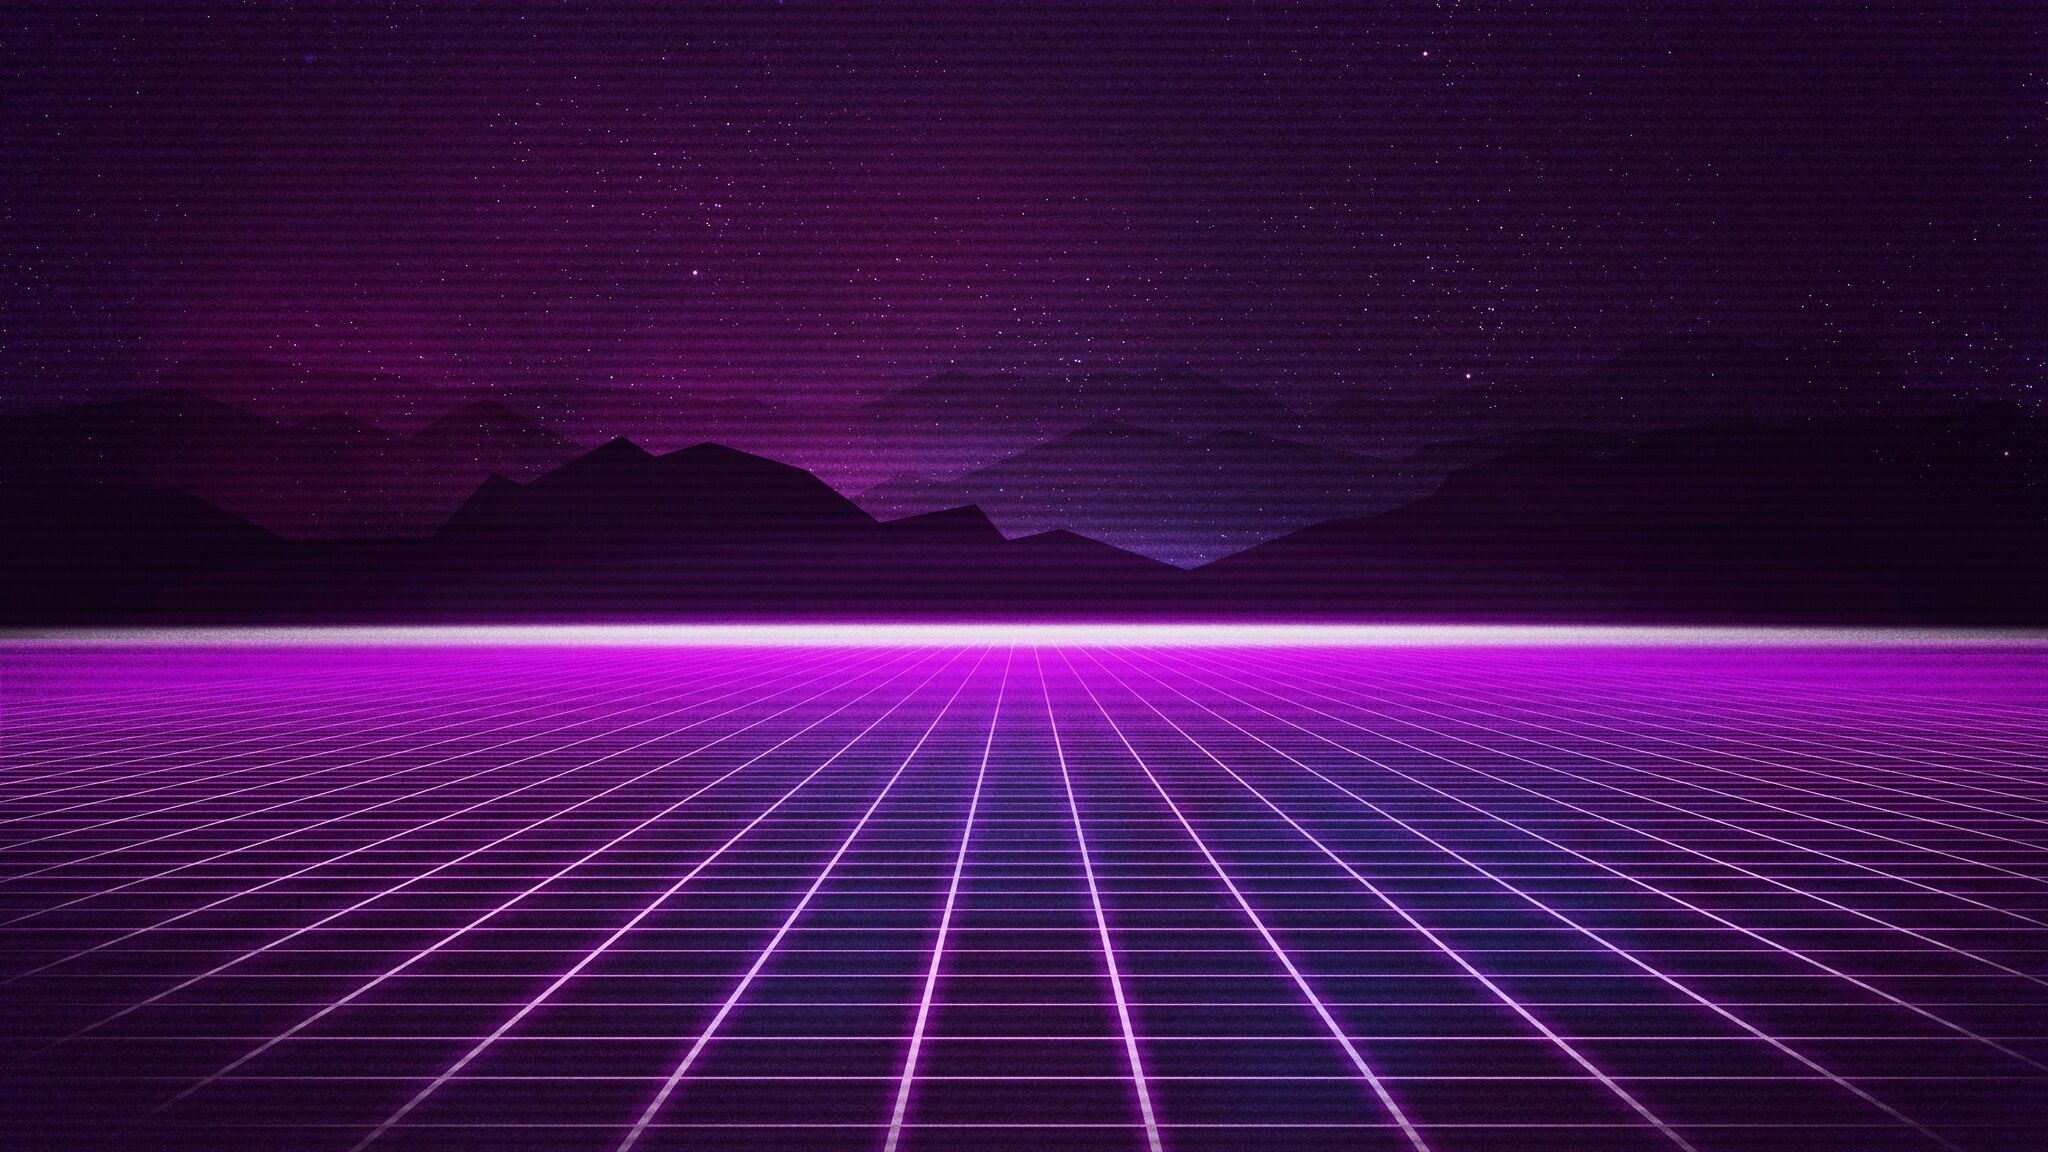 48x1152 Retrowave Grid Mountain 48x1152 Resolution Hd 4k Wallpapers Images Backgrounds Photos And Pictures